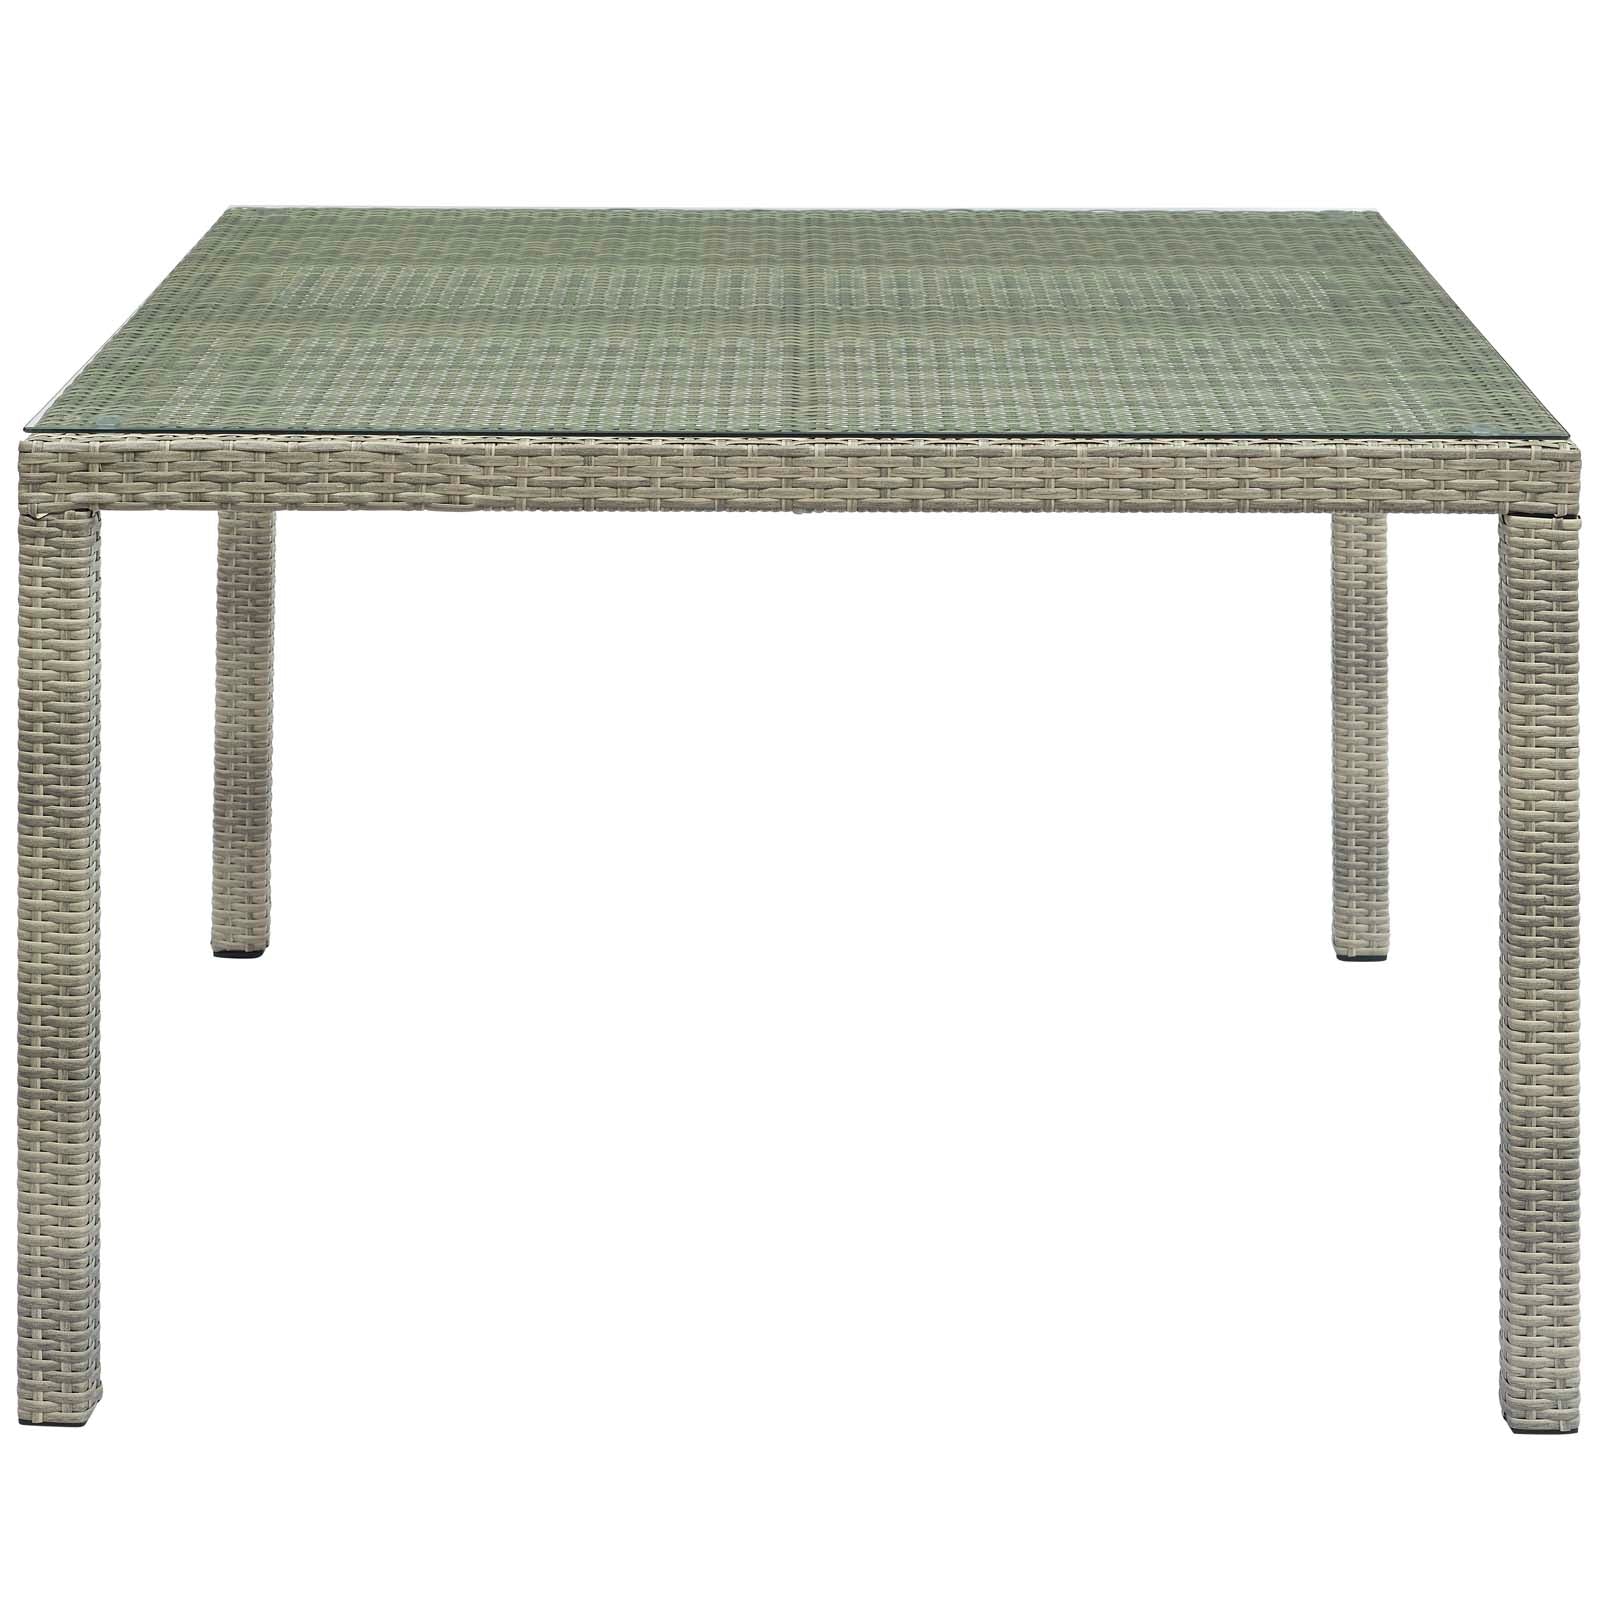 Conduit 47" Square Outdoor Patio Wicker Rattan Table - East Shore Modern Home Furnishings